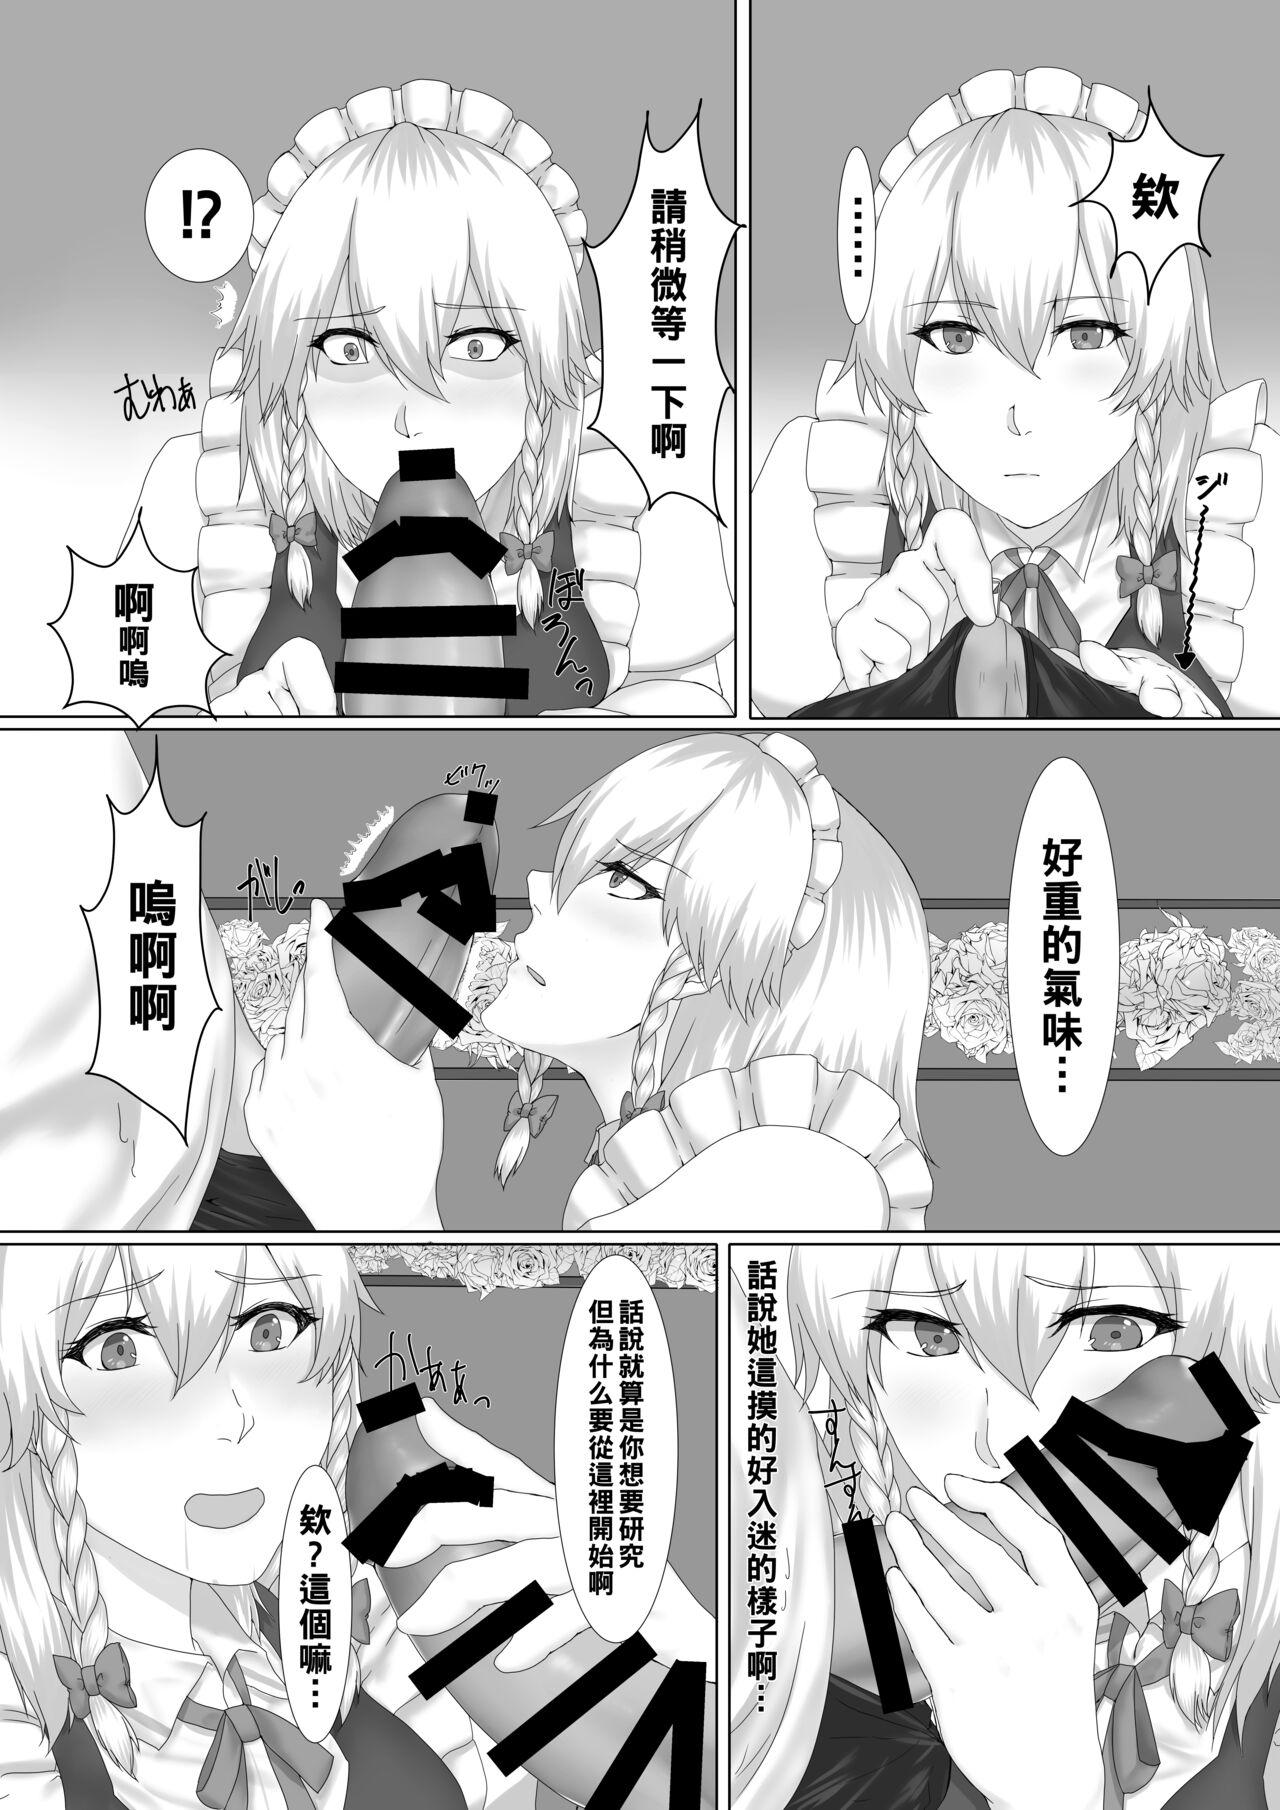 Spycam [糖質過多ぱると (只野めざし)] 咲夜さんとセフレになる本 (東方Project)（Chinese） - Touhou project Gay 3some - Page 4